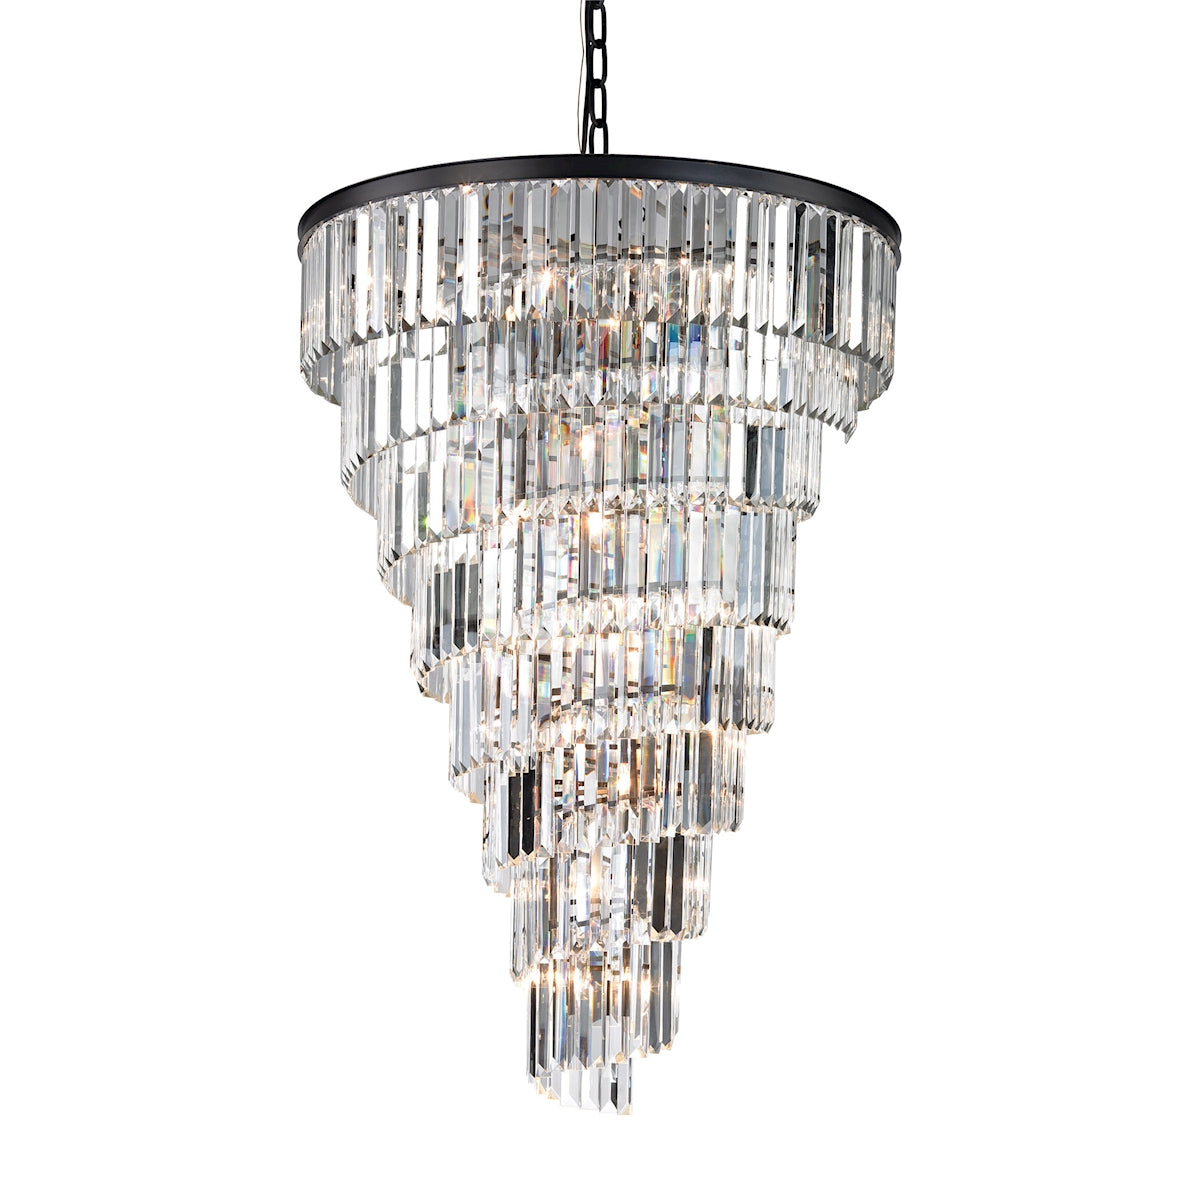 ELK Lighting 14219/14 Palacial 15-Light Chandelier in Oil Rubbed Bronze with Clear Crystal